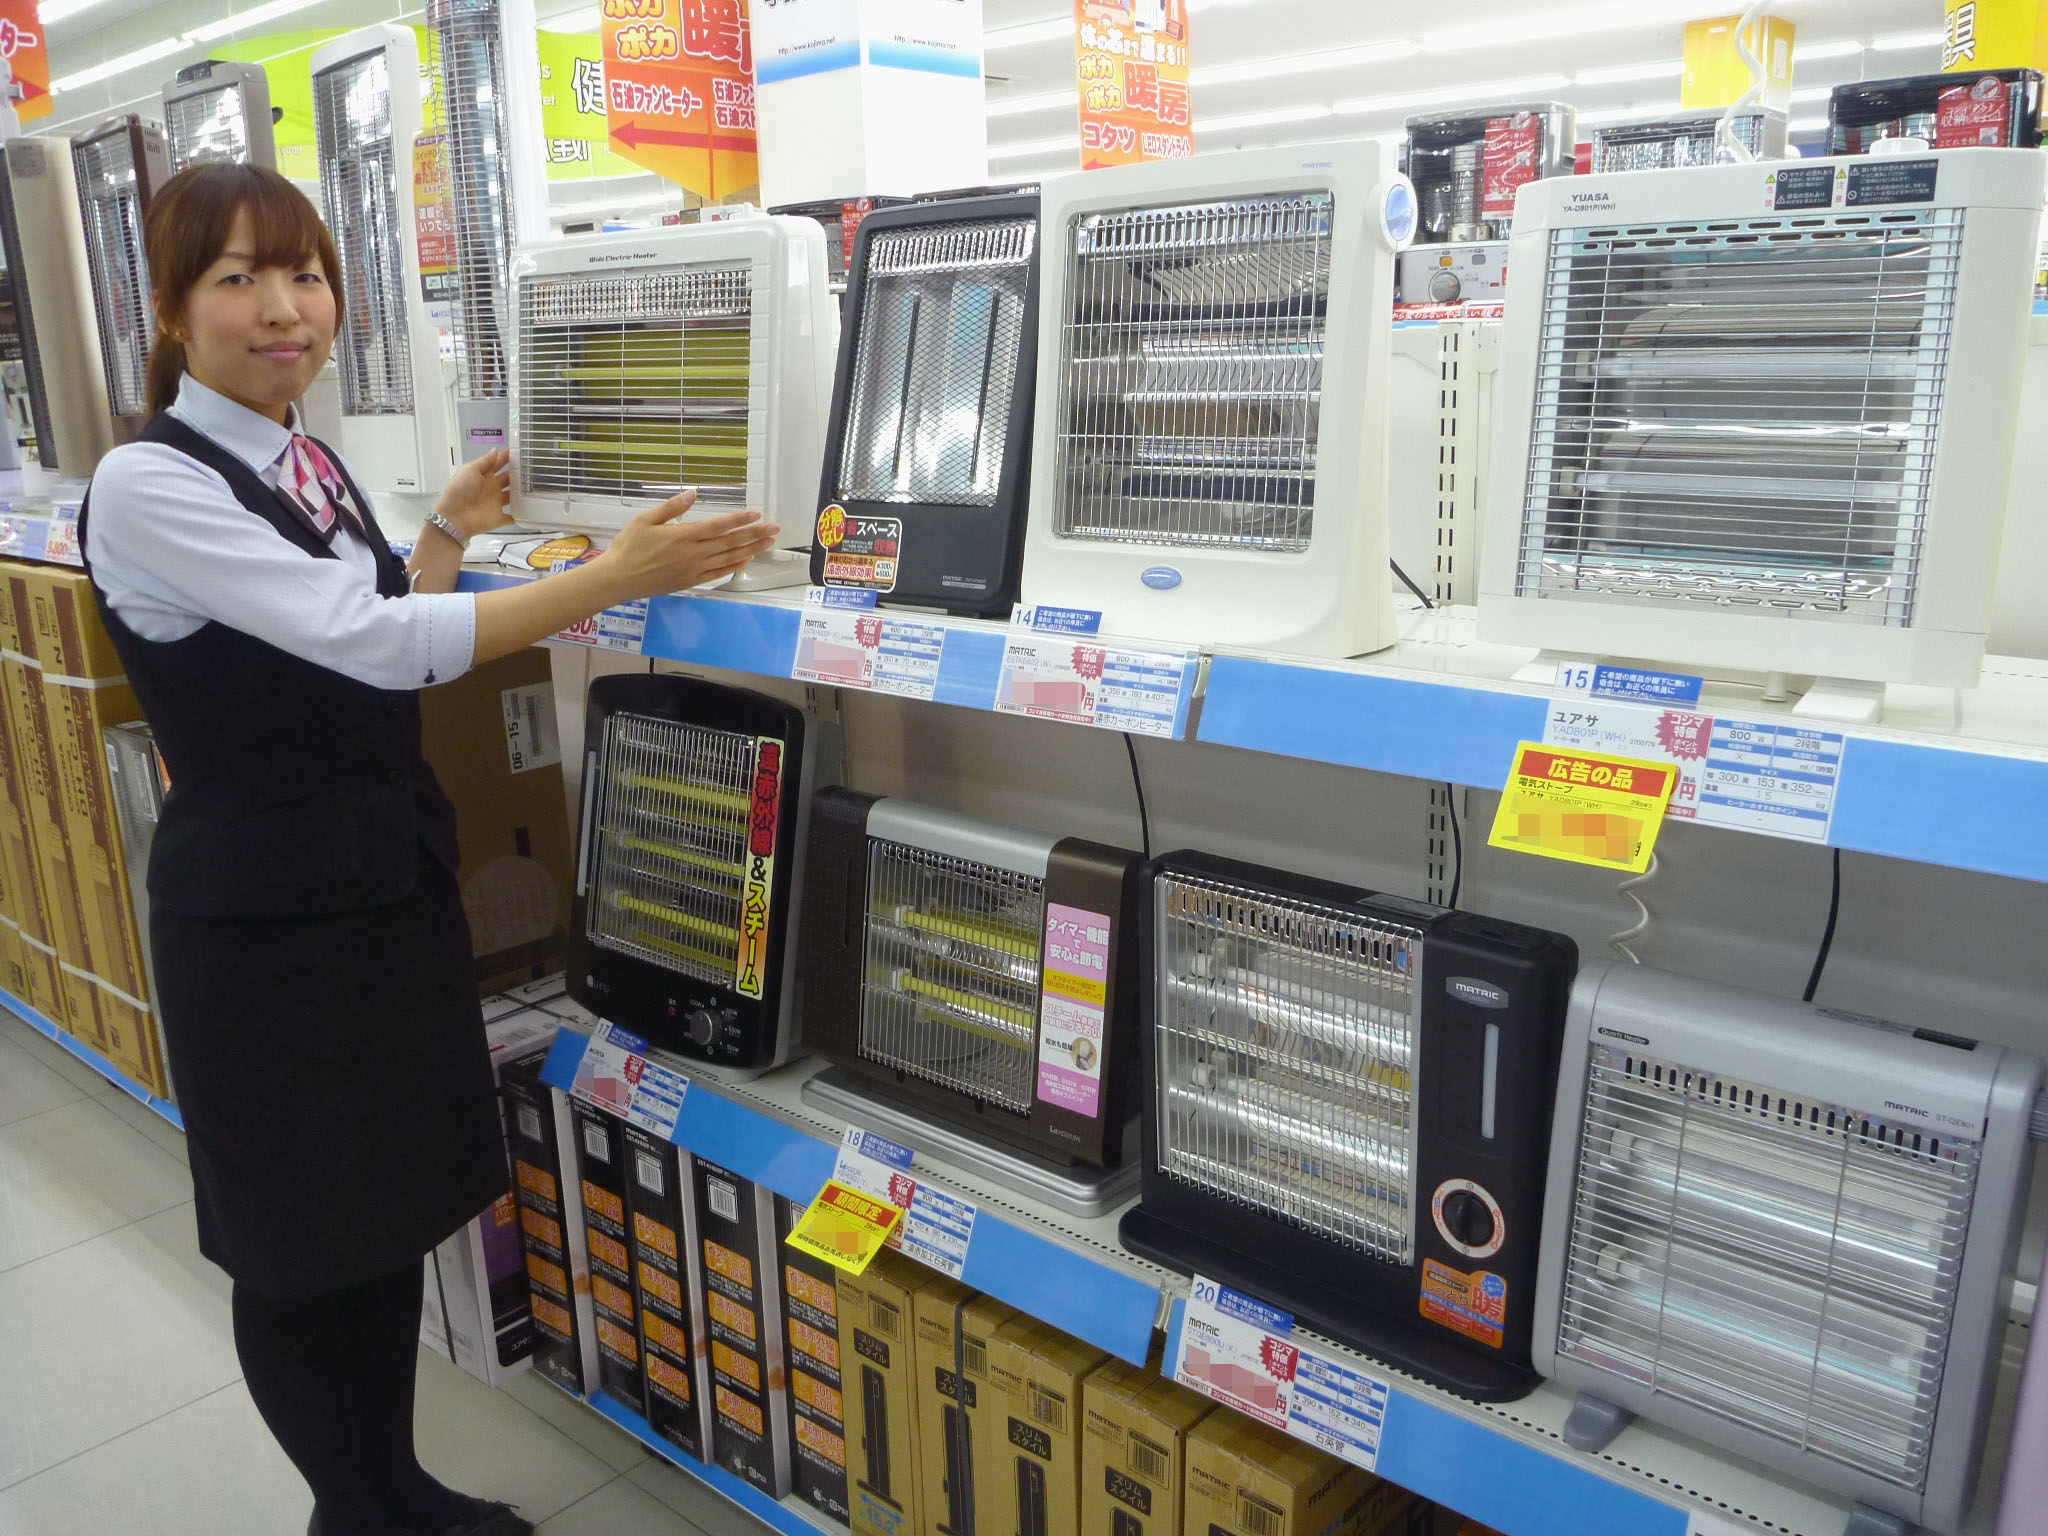 Low-priced 'generic' household appliances gaining popularity - The Japan  Times